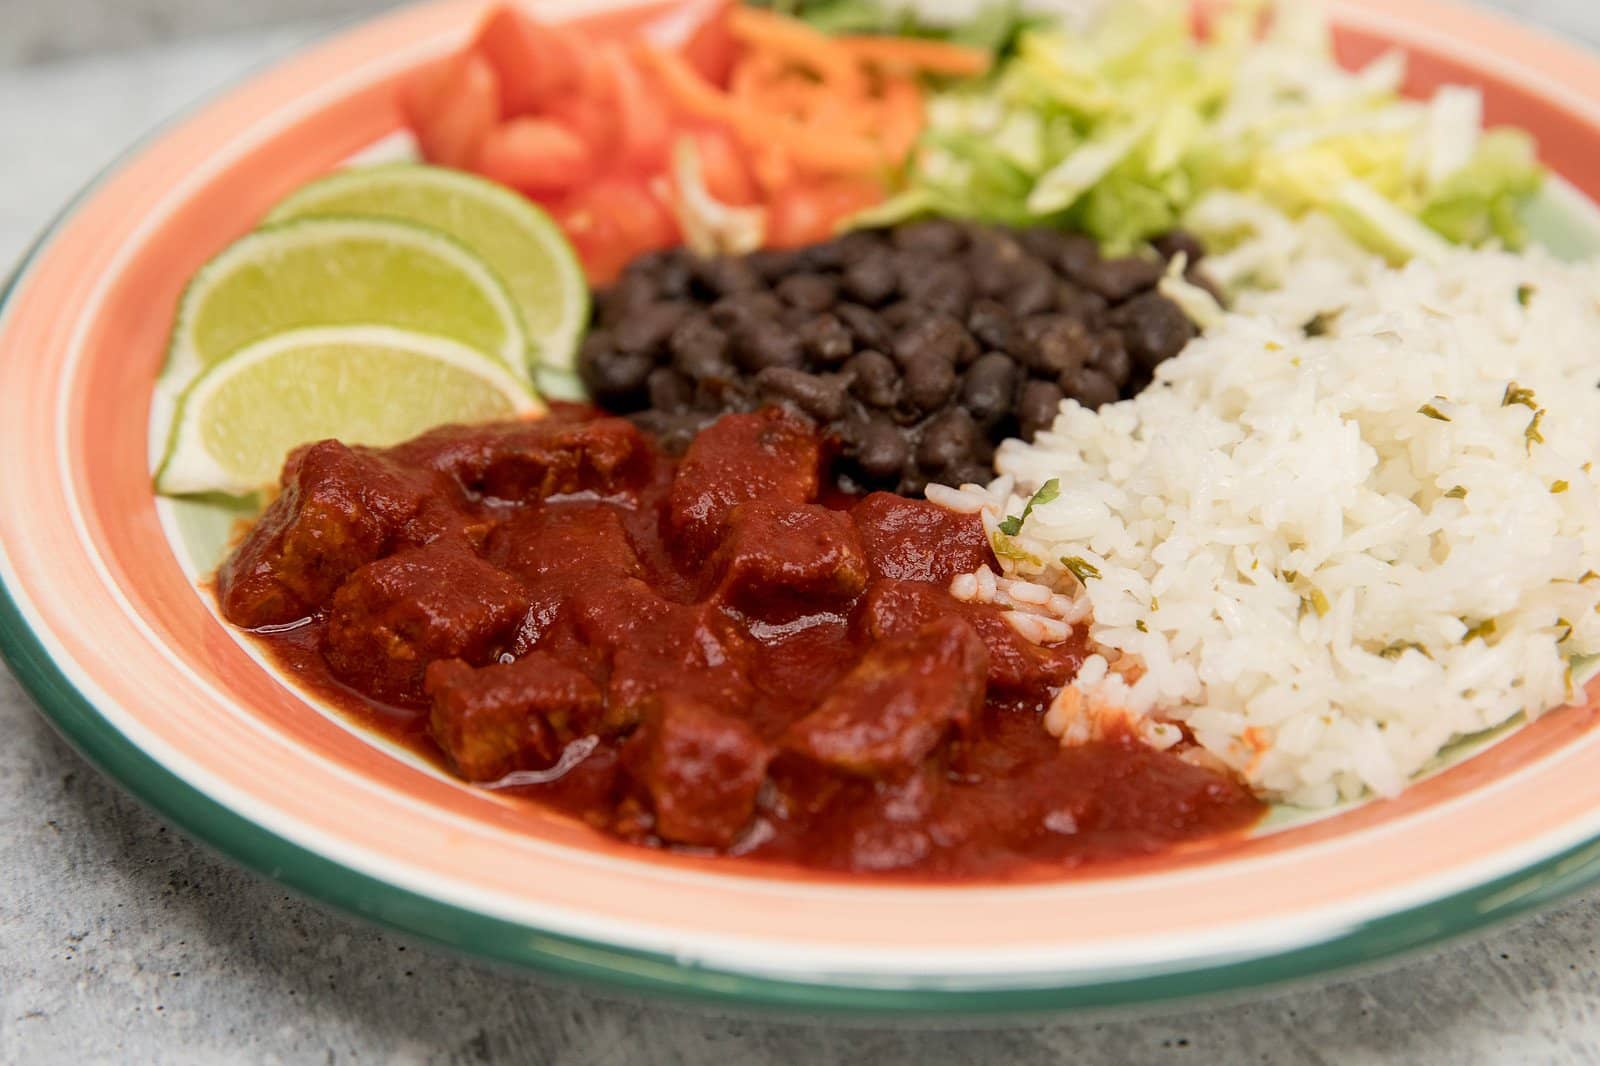 A plate of Mexican food featuring chicken enchiladas in Sun-Dried Red Chile Sauce, accompanied by white rice, black beans, diced tomatoes, shredded lettuce, and slices of lime.